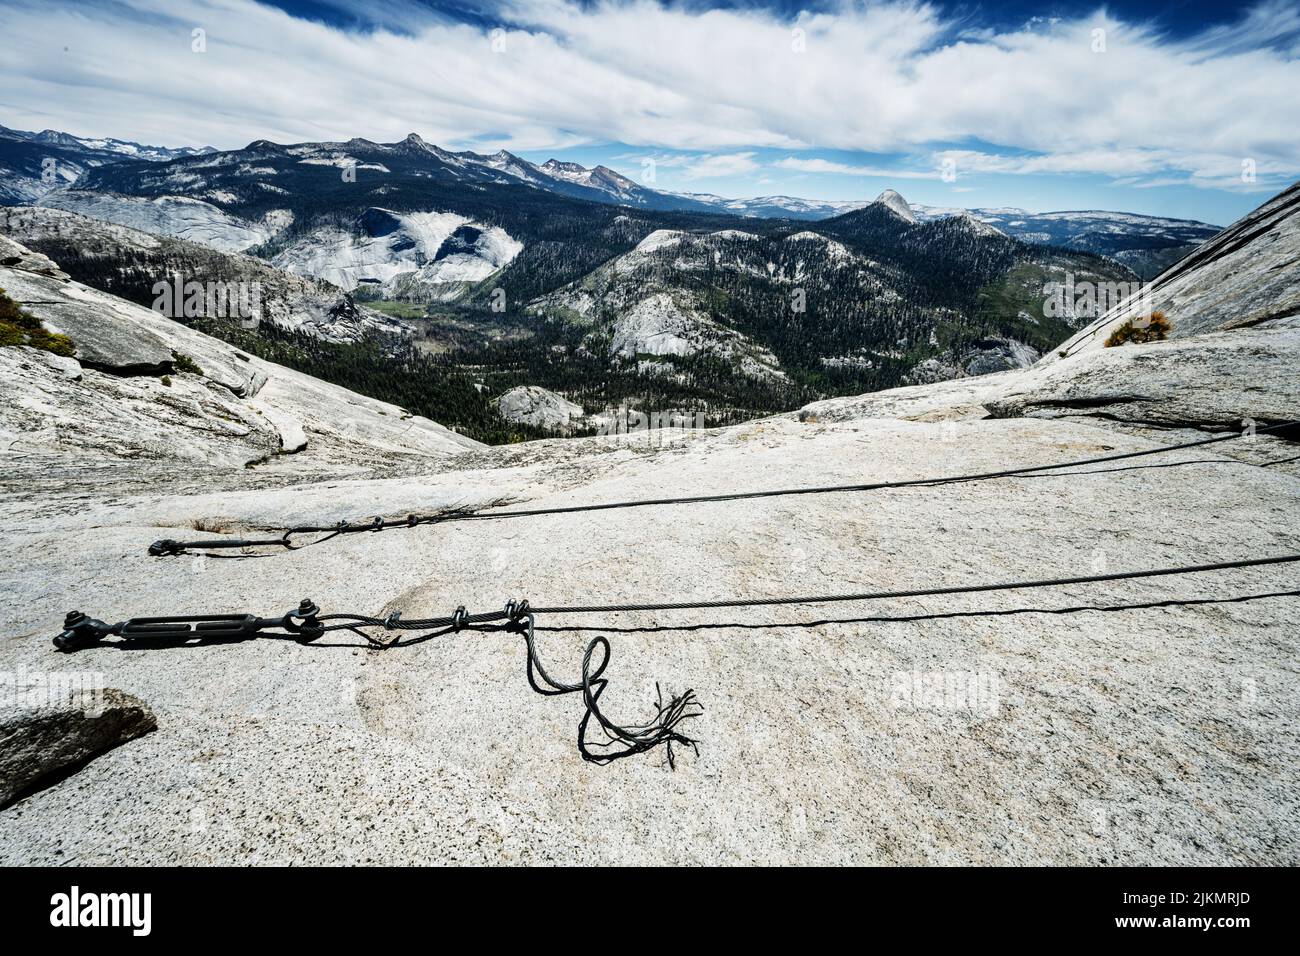 The Cables up Half dome, Yosemite National Park, California Stock Photo